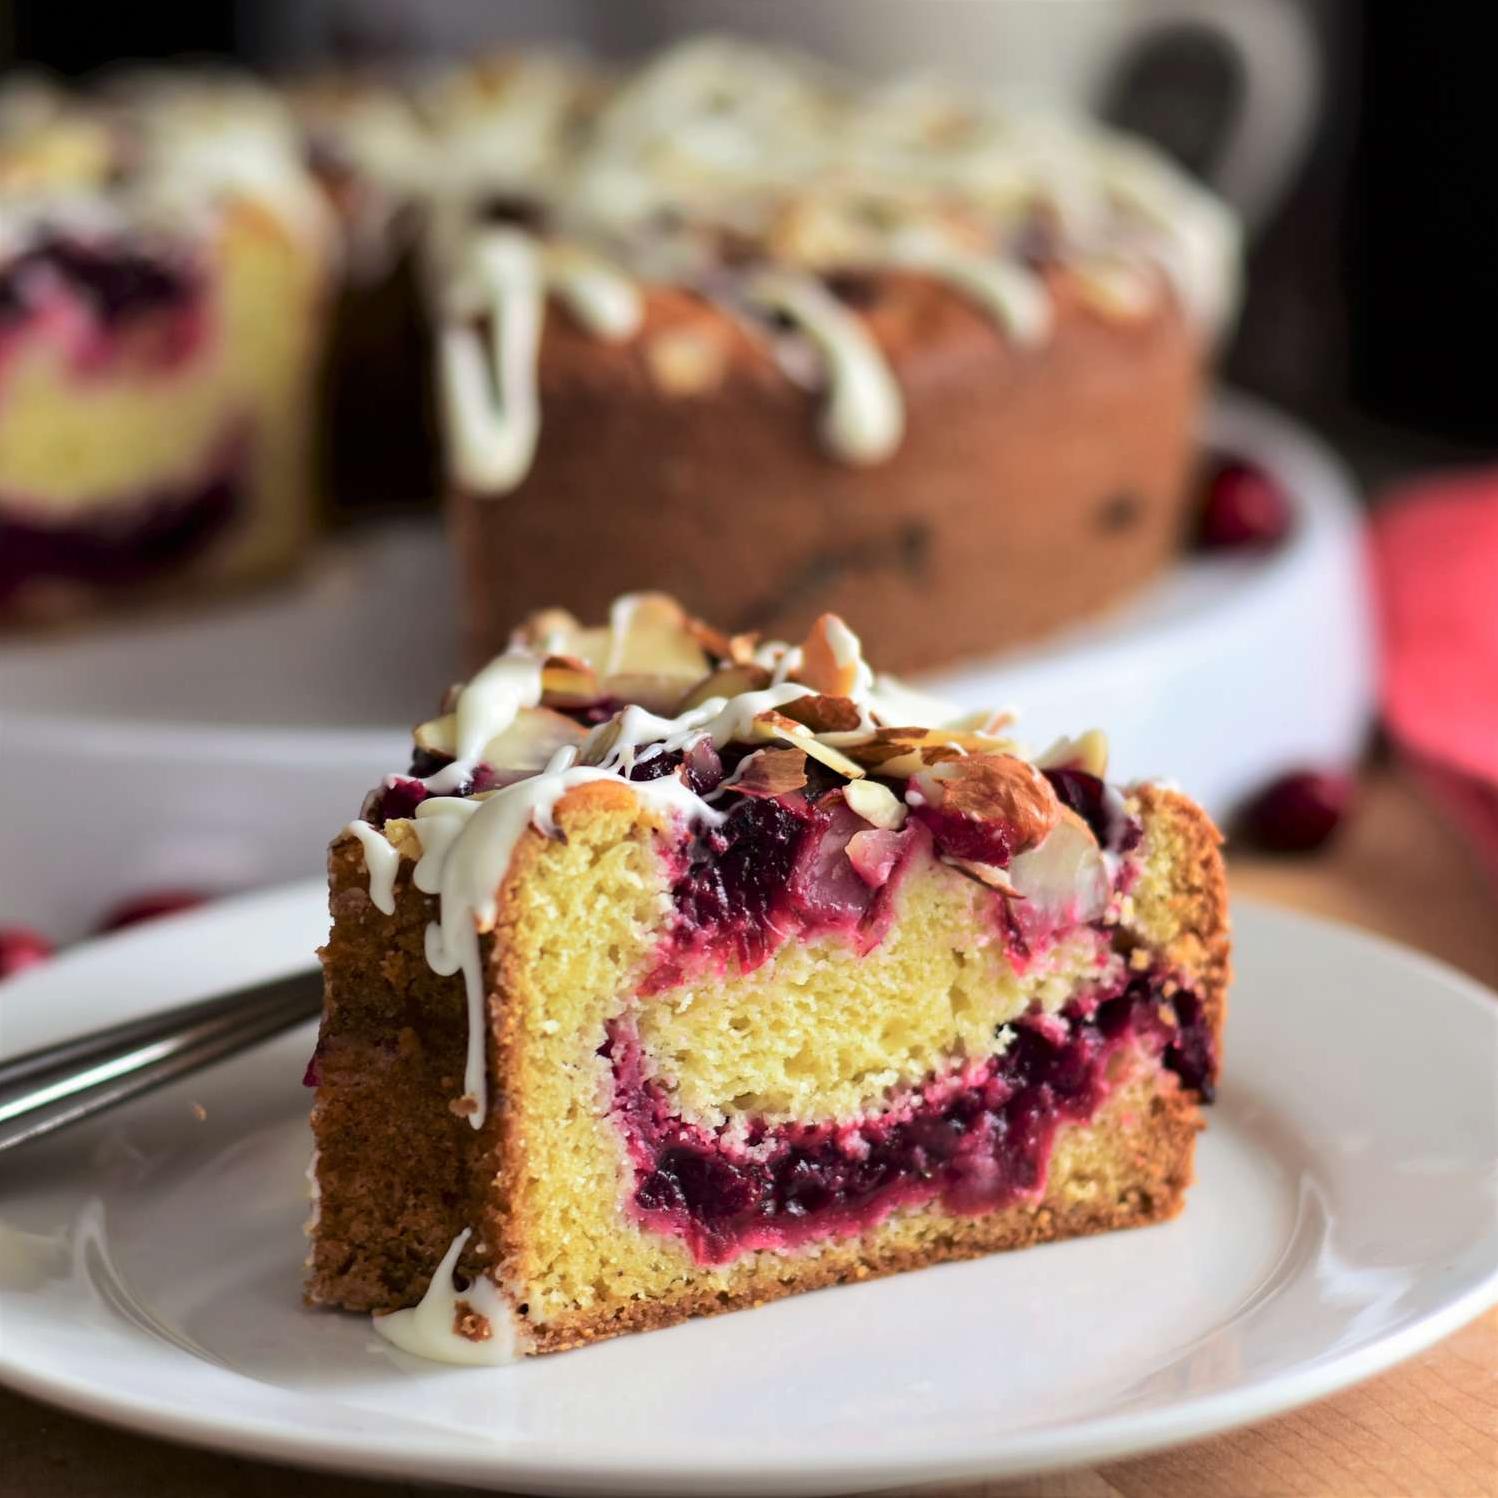  Cranberry swirl adds a festive touch to this classic cake